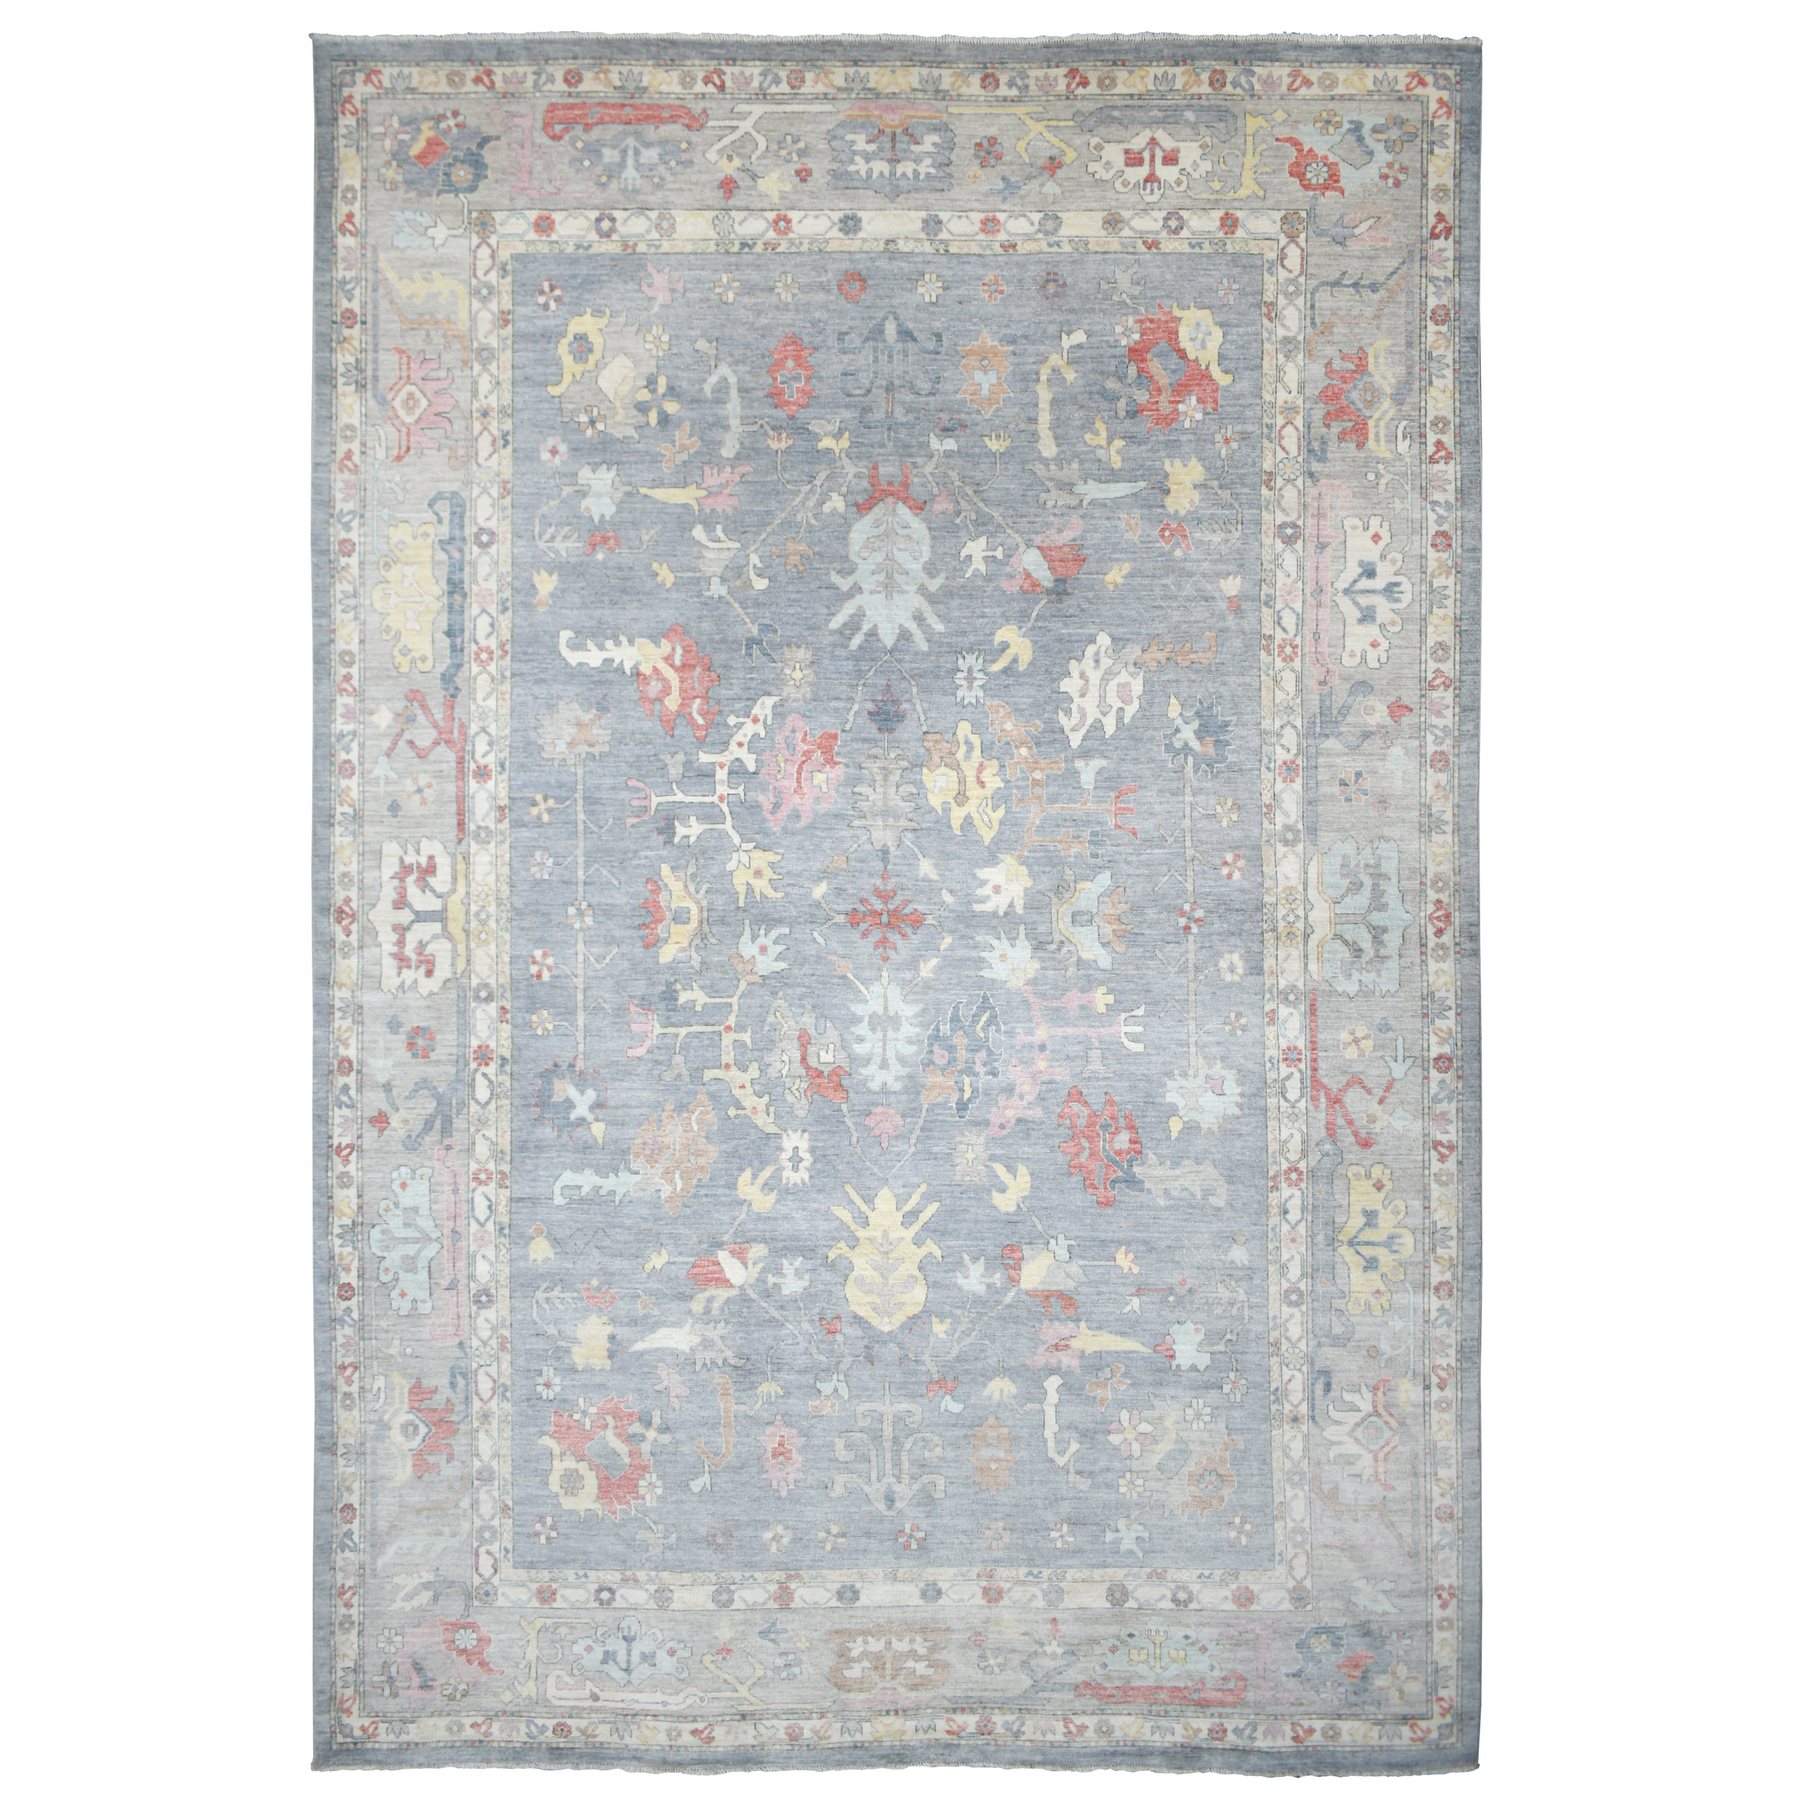 12'1"x17'8" Gray Angora Oushak With Colorful Leaf Design Natural Dyes, Afghan Wool Hand Woven Oversize Oriental Rug 